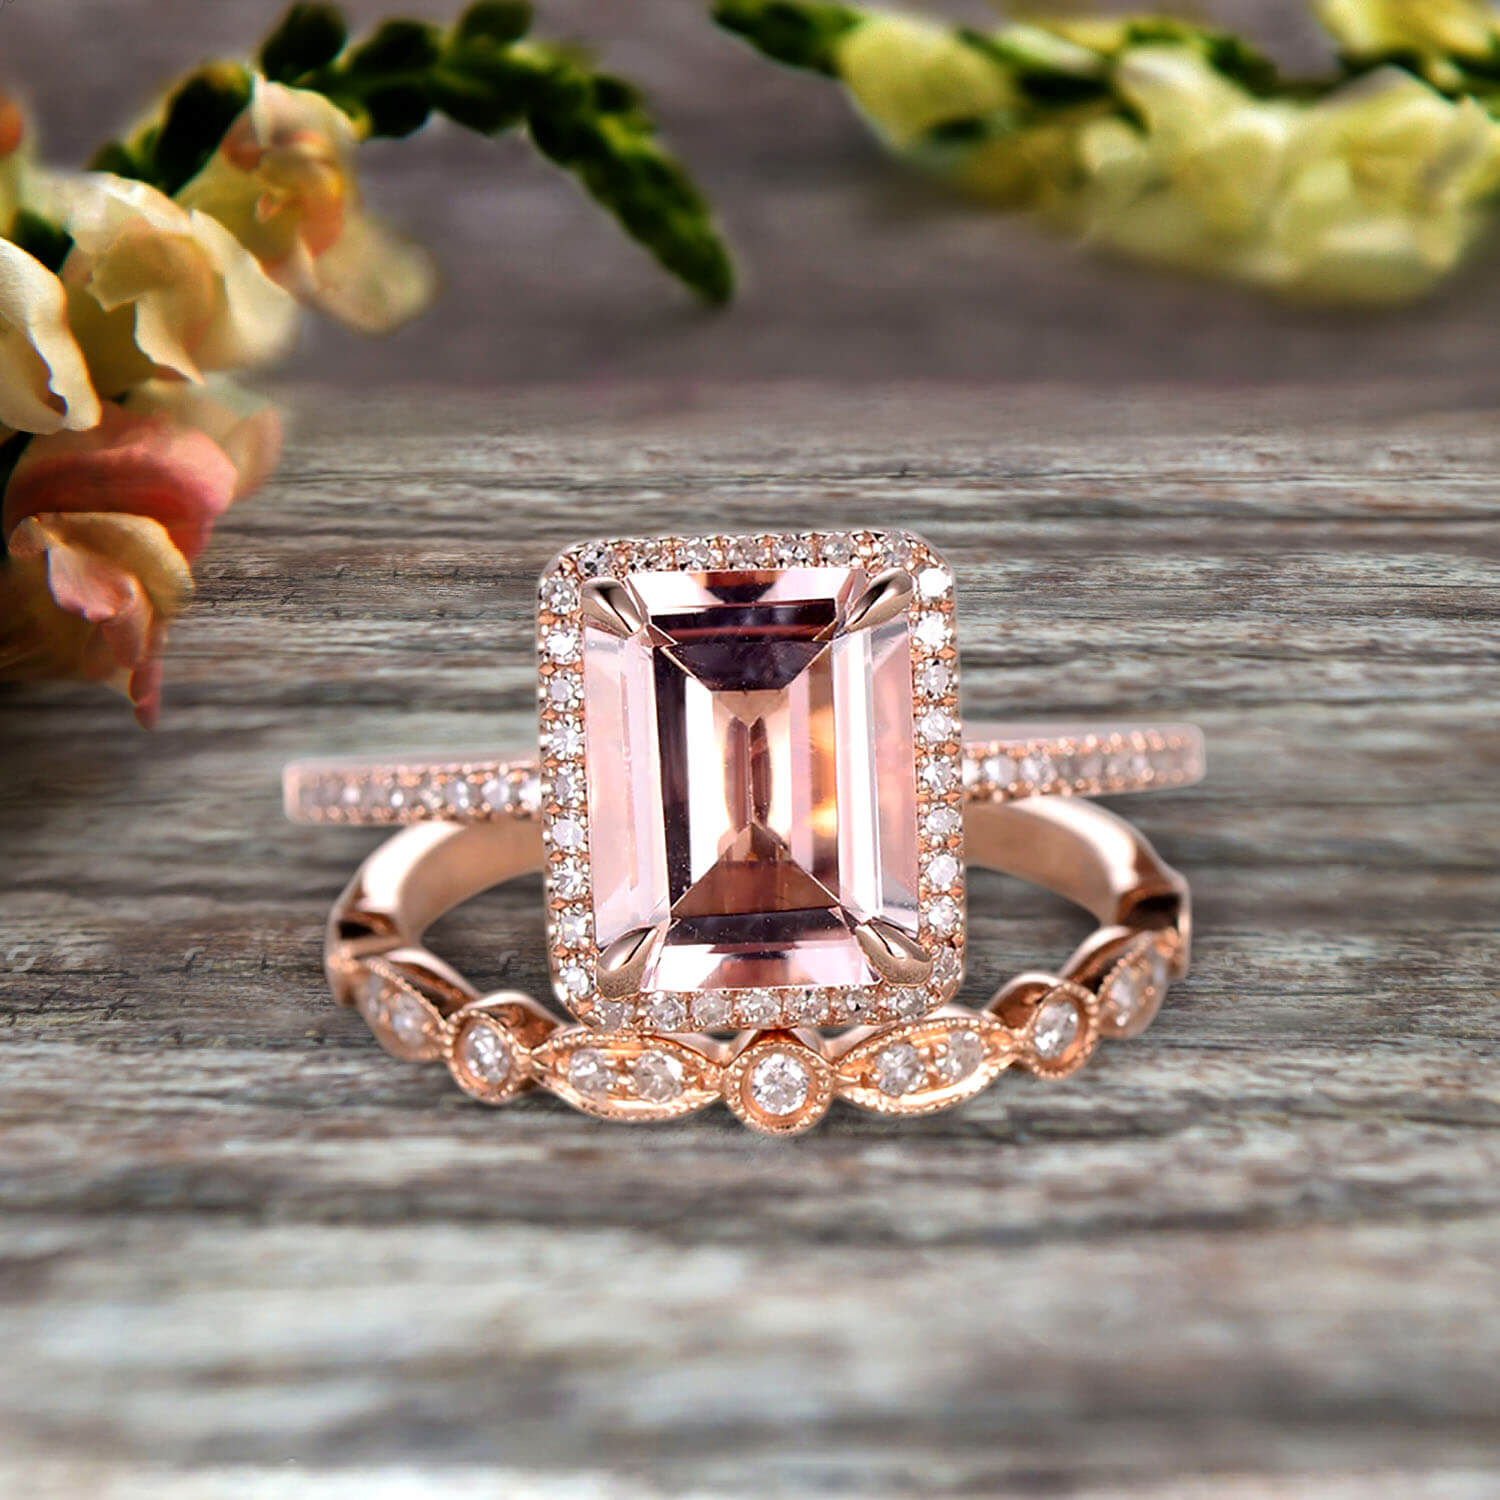 7x9mm Emerald Cut Pink Morganite Engagement Ring,14K Plain White  Gold,Solitaire Ring,Heart Side Design | Amazon.com